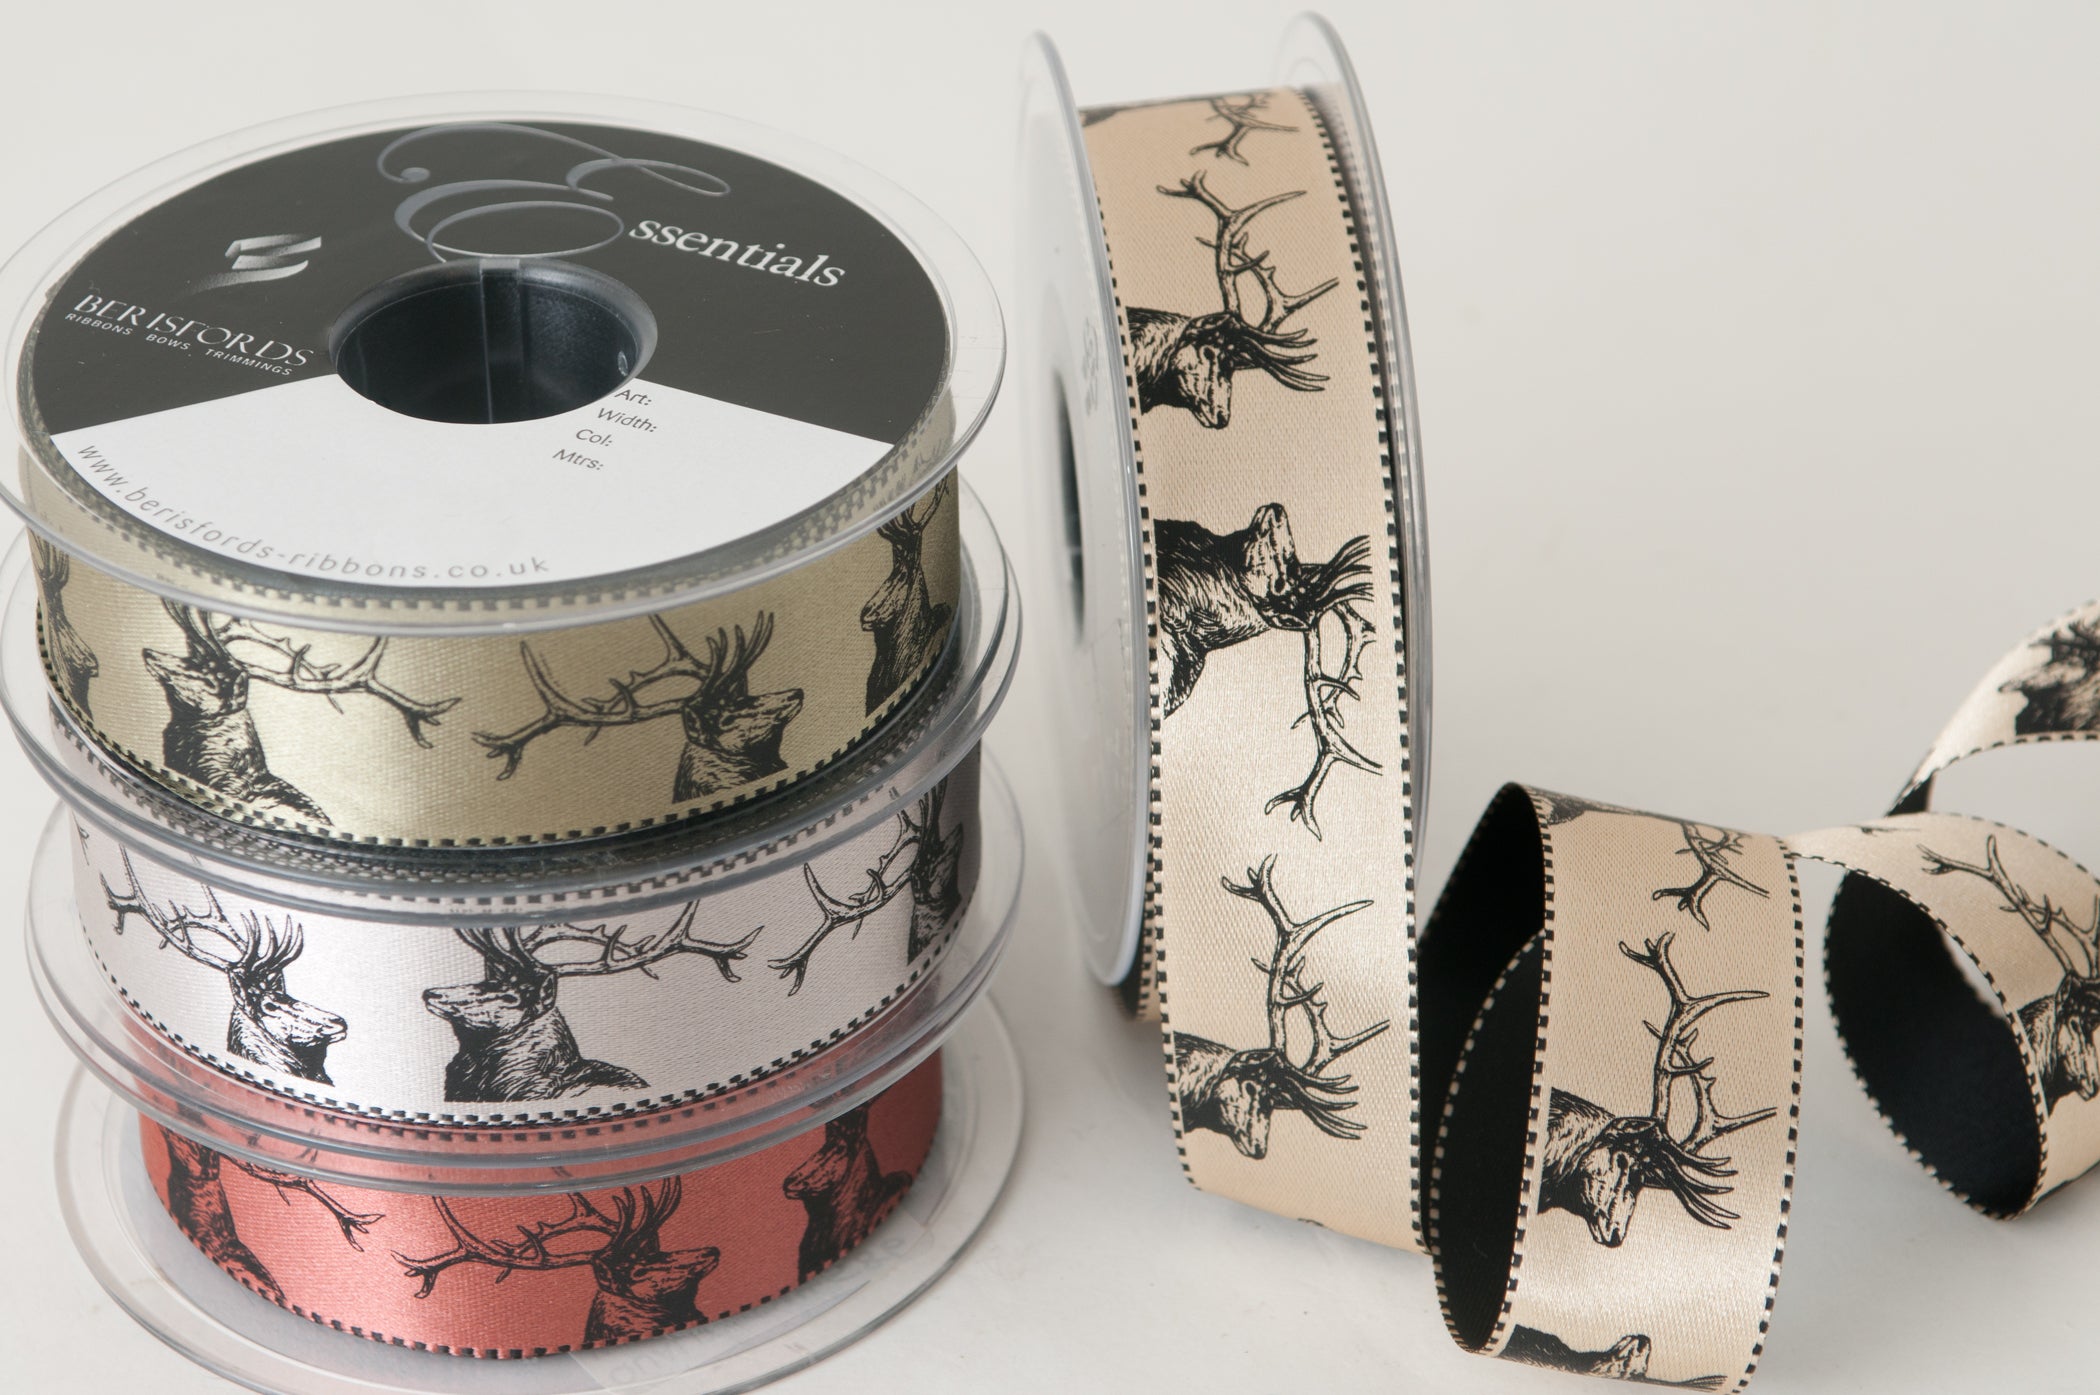 Berisfords Satin Ribbon with Stag Print - Silver Grey 25mm